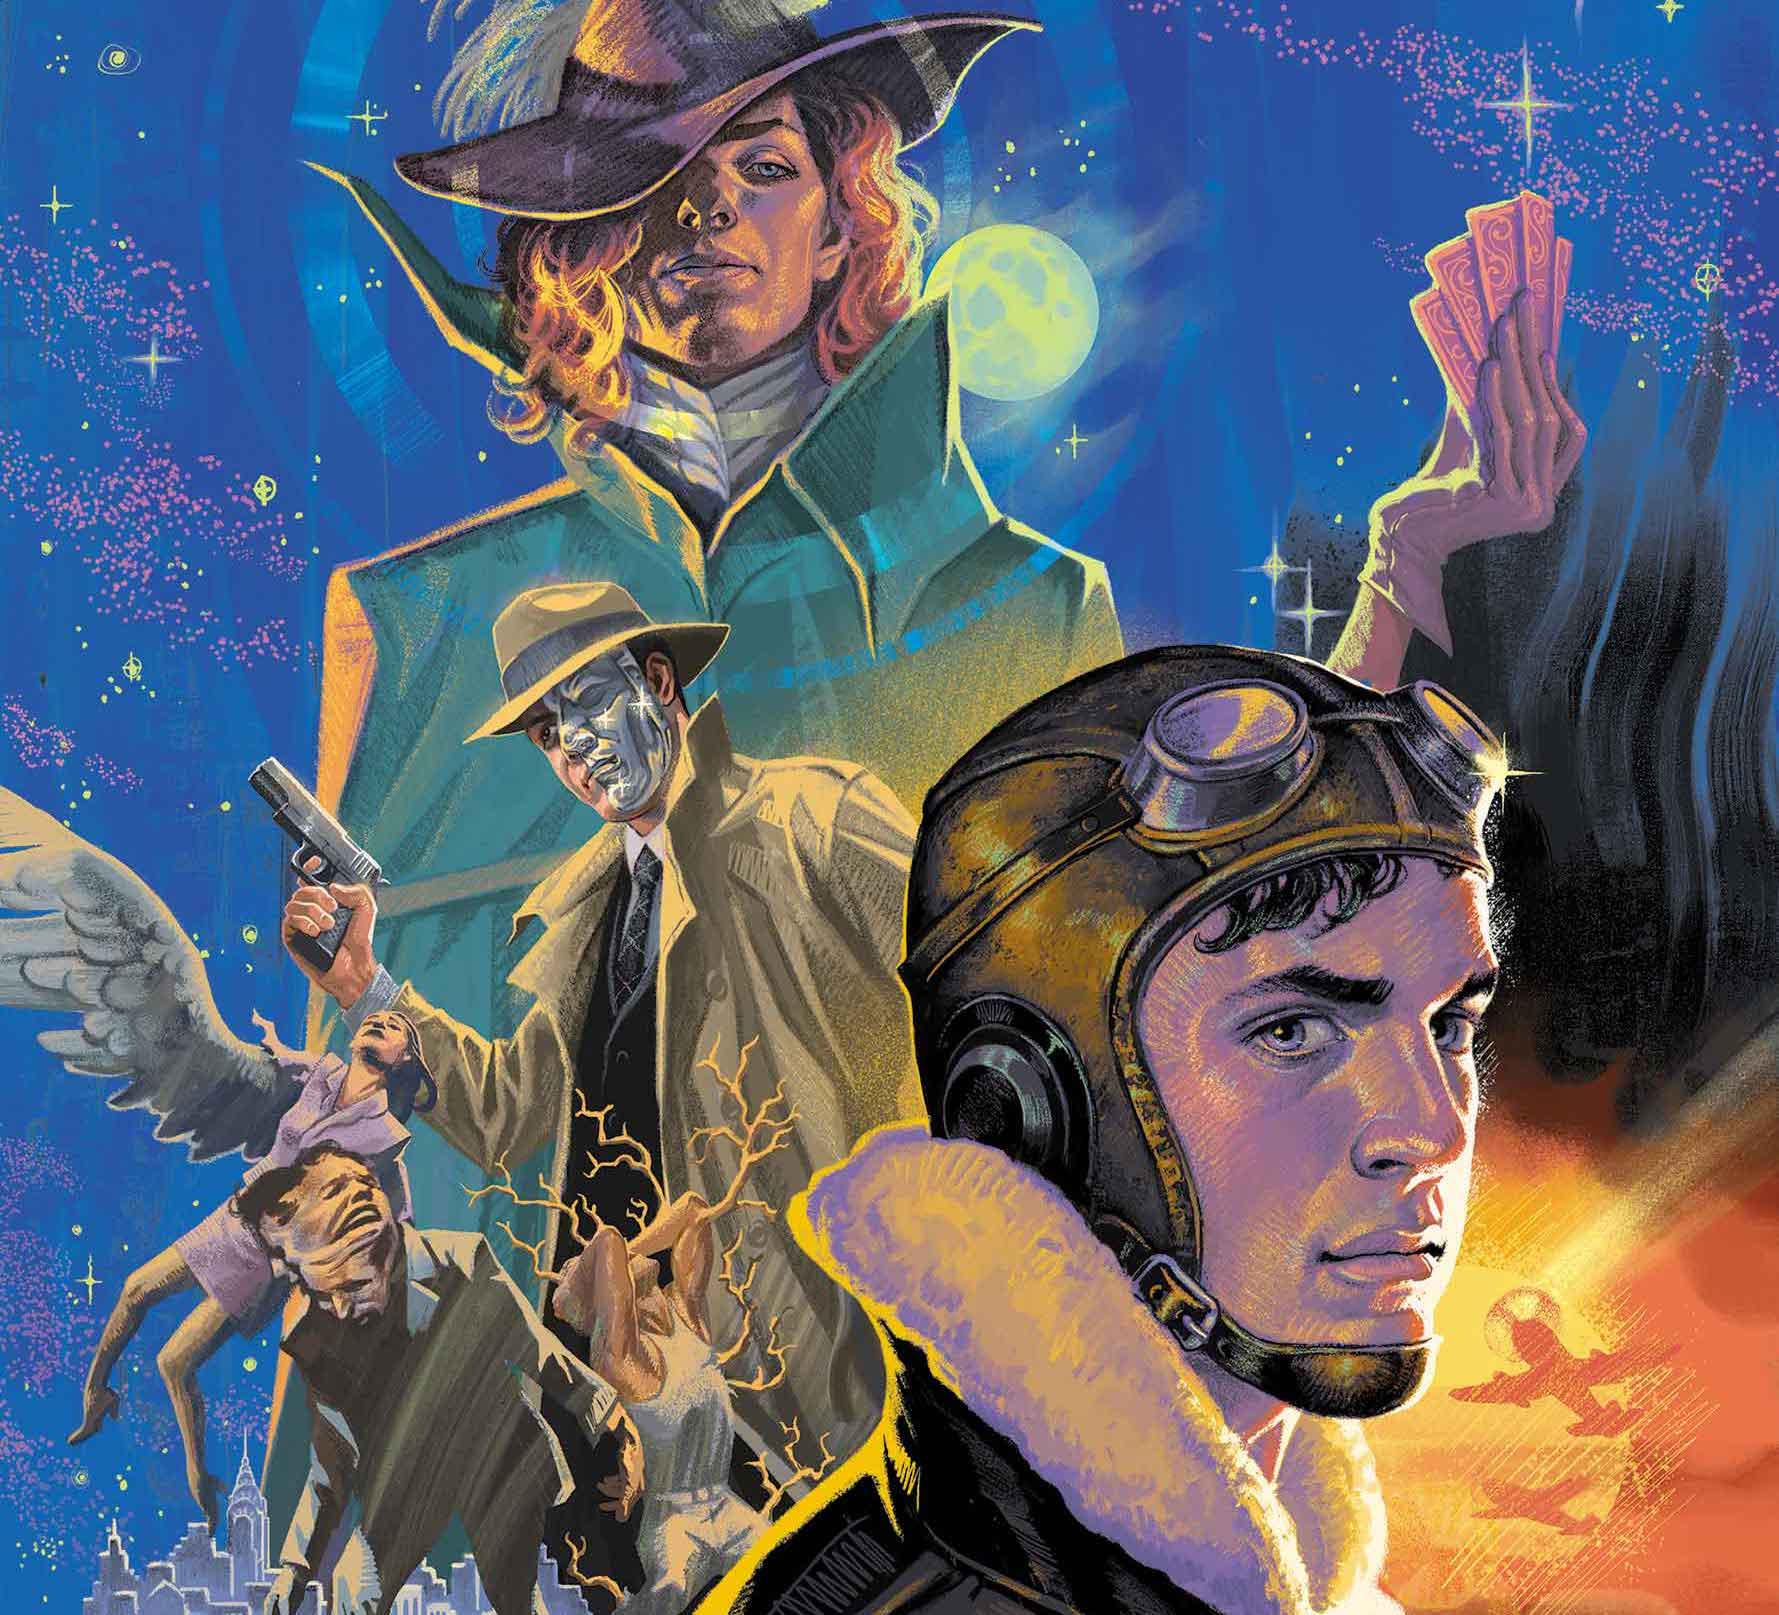 'Wild Cards: The Drawing of Cards' TPB is a good mix of sci-fi and pulp drama